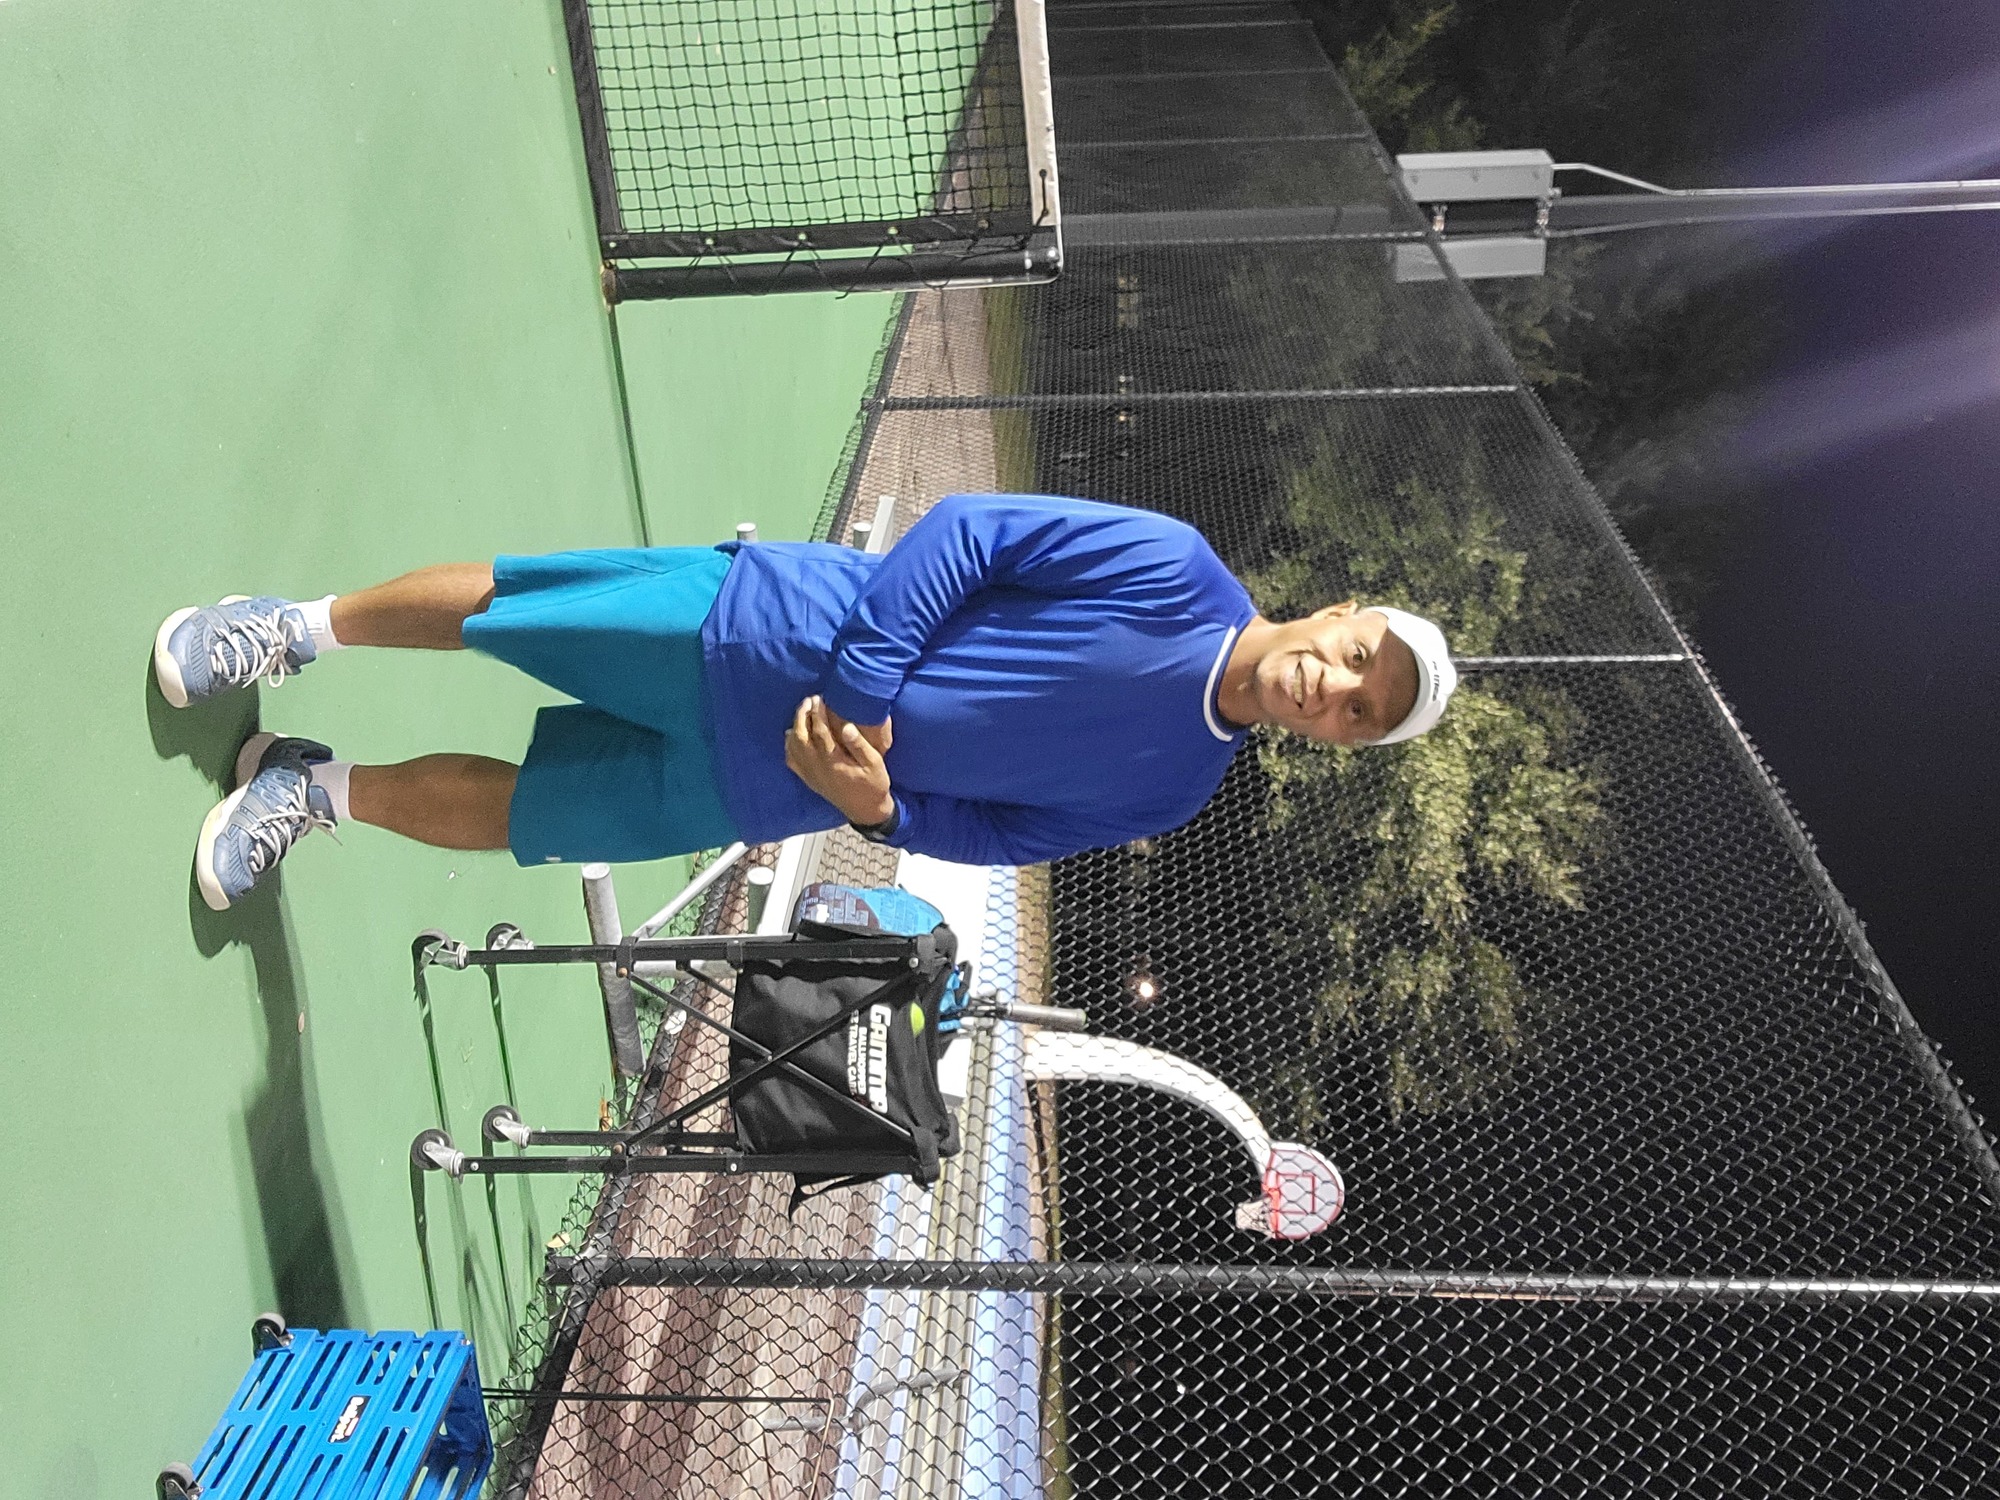 Ethan A. teaches tennis lessons in Casselberry, FL